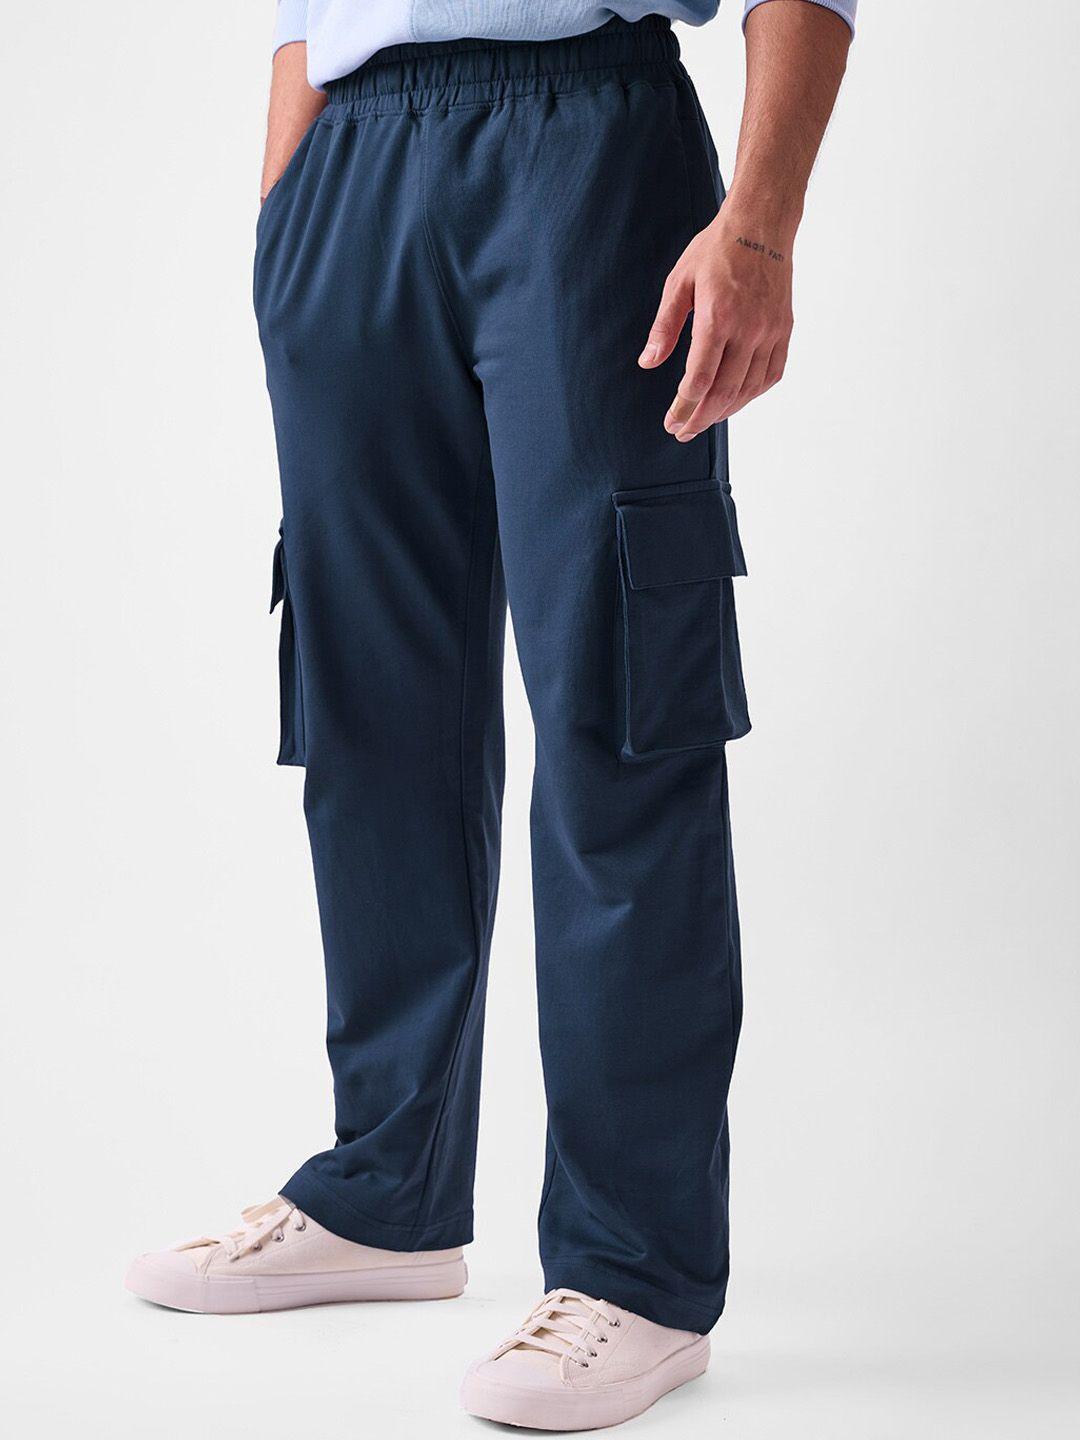 the souled store blue men mid rise cargos